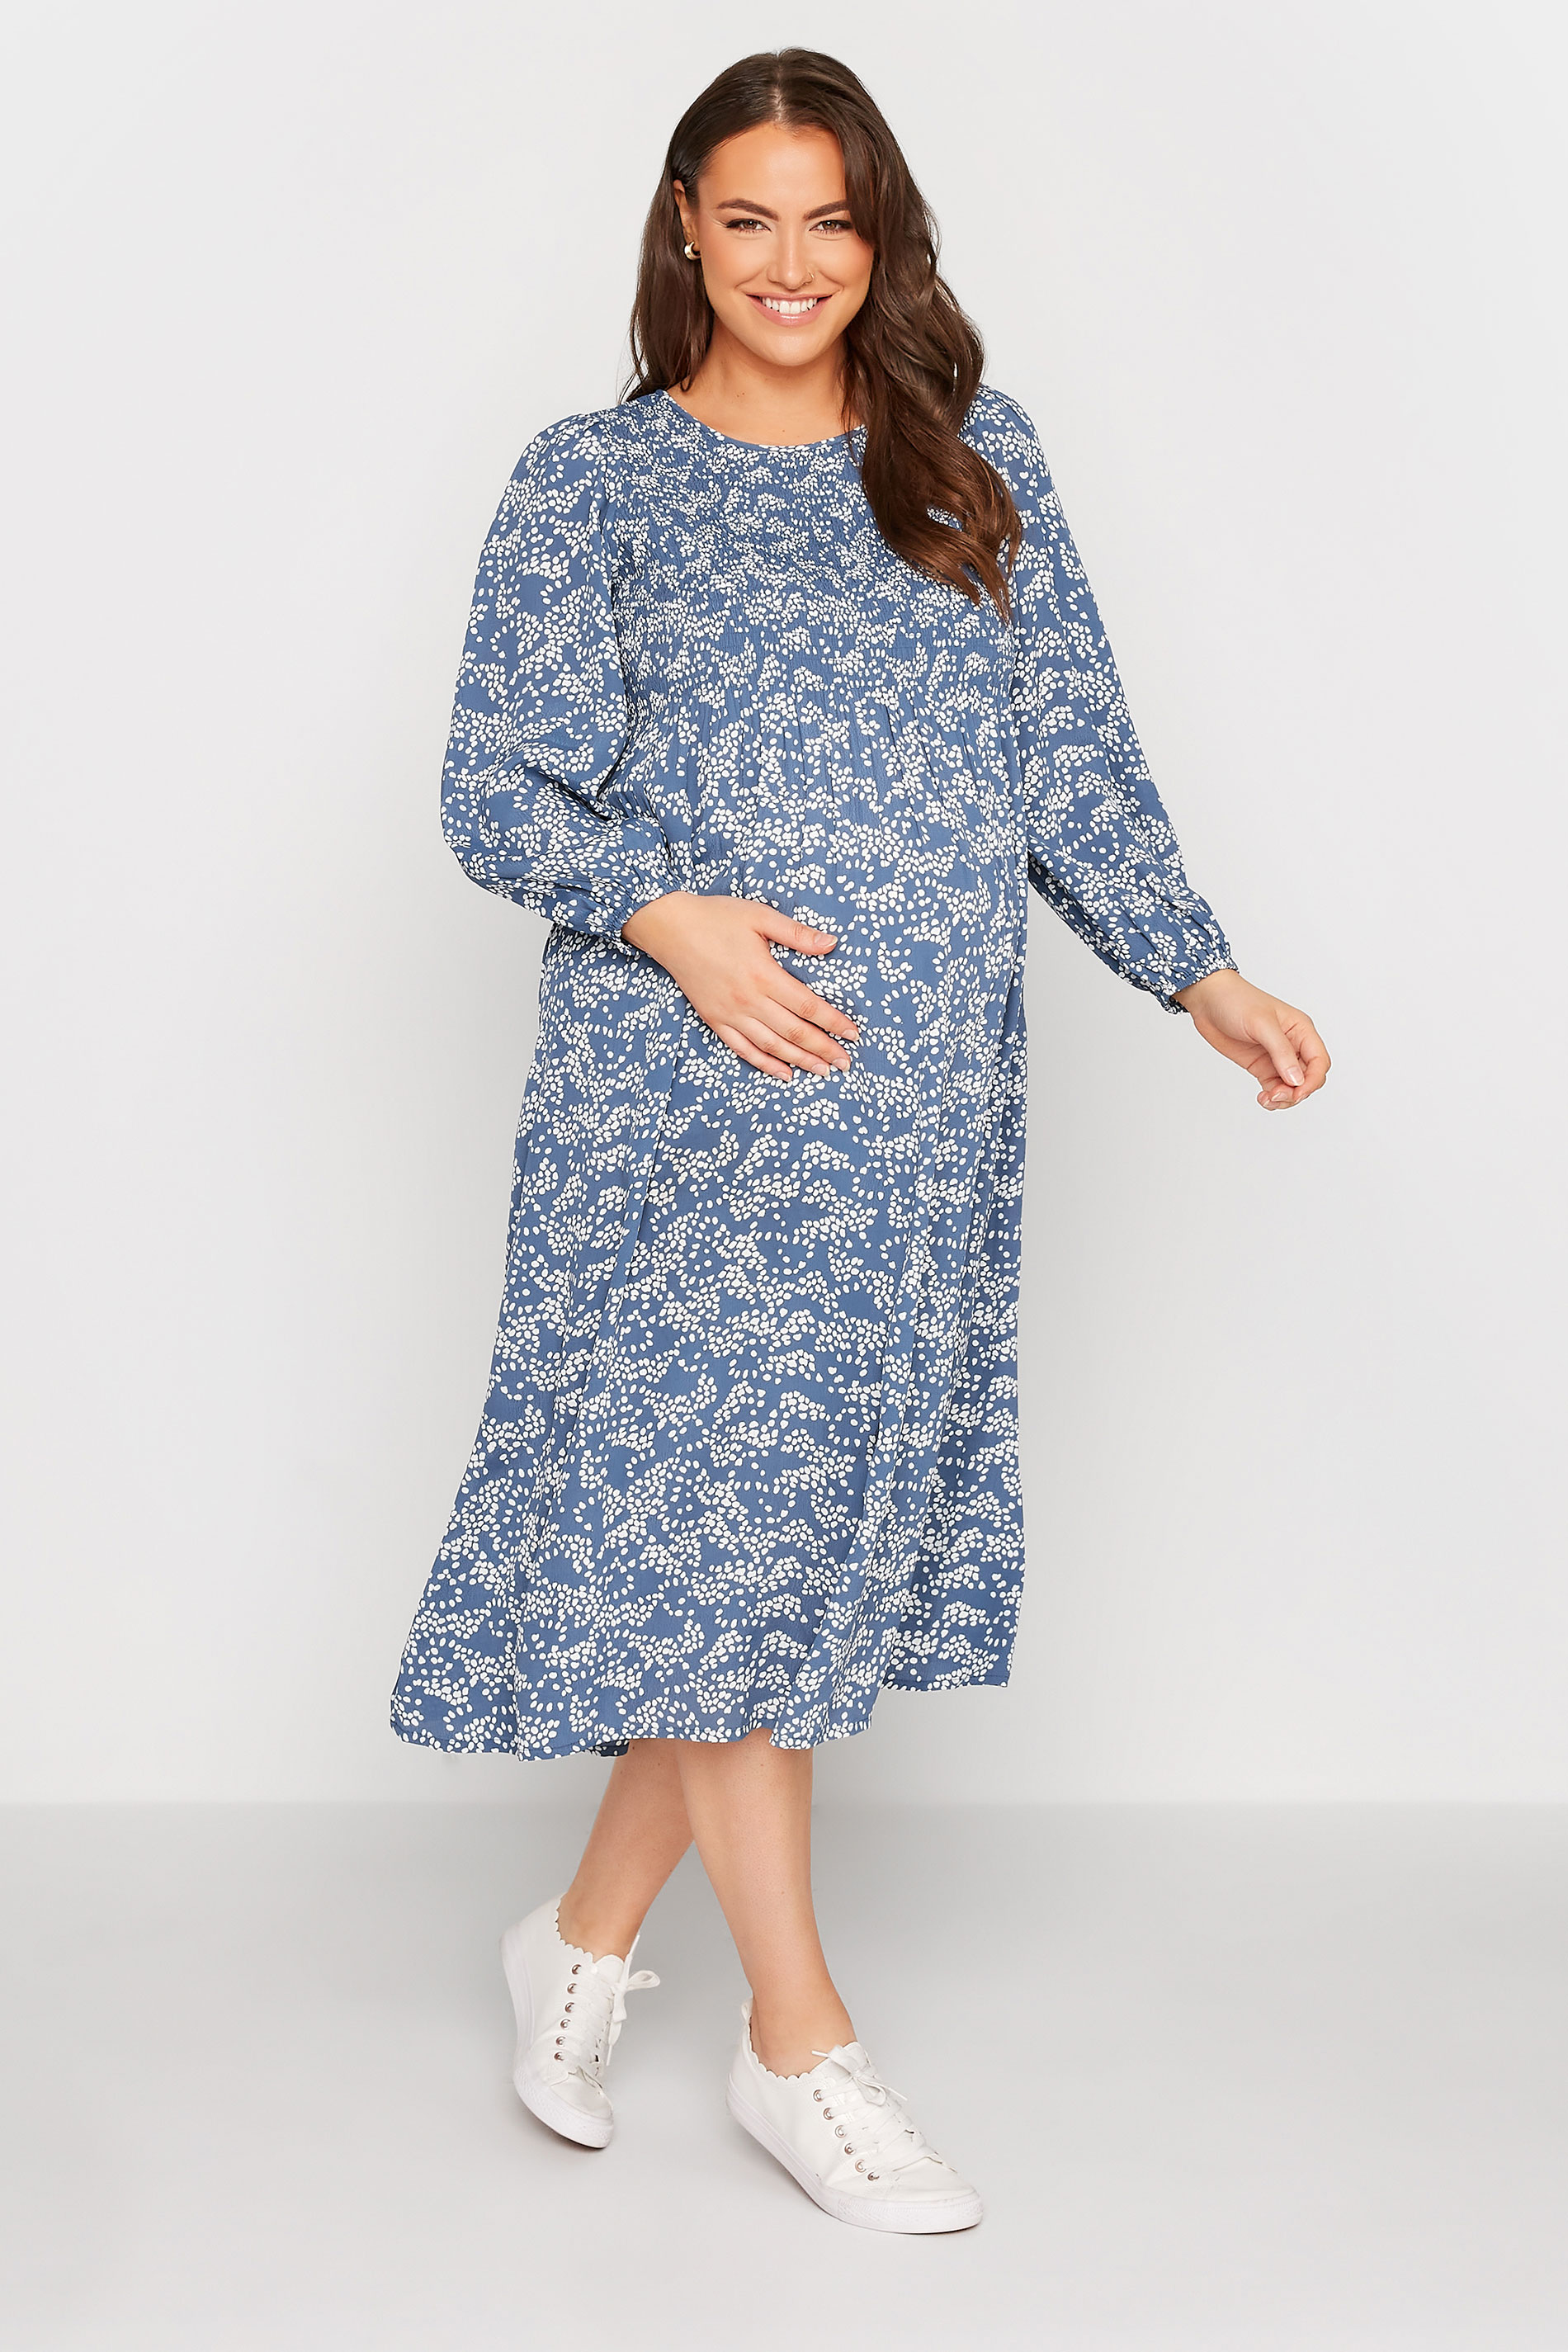 BUMP IT UP MATERNITY Plus Size Blue Ditsy Print Shirred Smock Dress | Yours Clothing 1